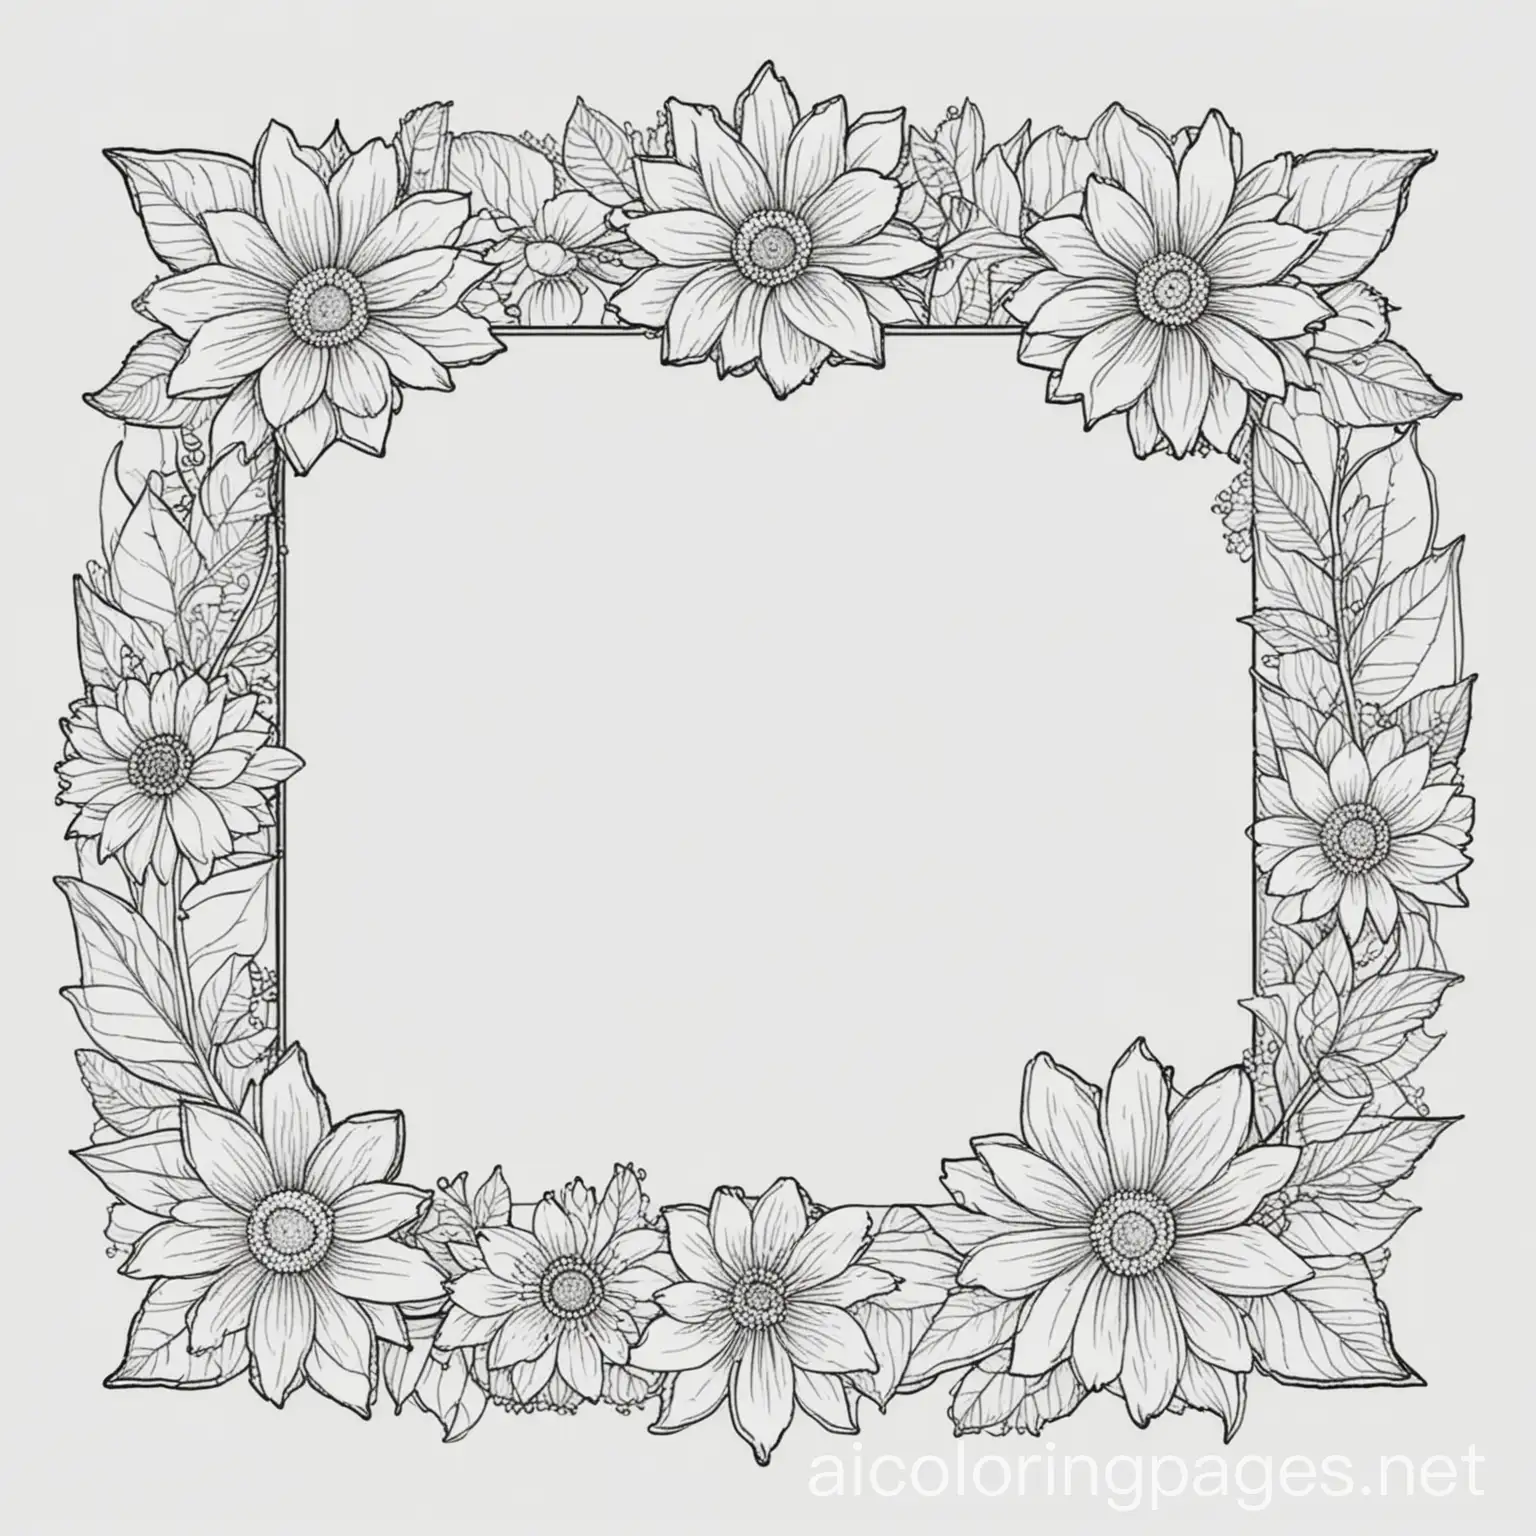 flower frame, Coloring Page, black and white, line art, white background, Simplicity, Ample White Space. The background of the coloring page is plain white to make it easy for young children to color within the lines. The outlines of all the subjects are easy to distinguish, making it simple for kids to color without too much difficulty